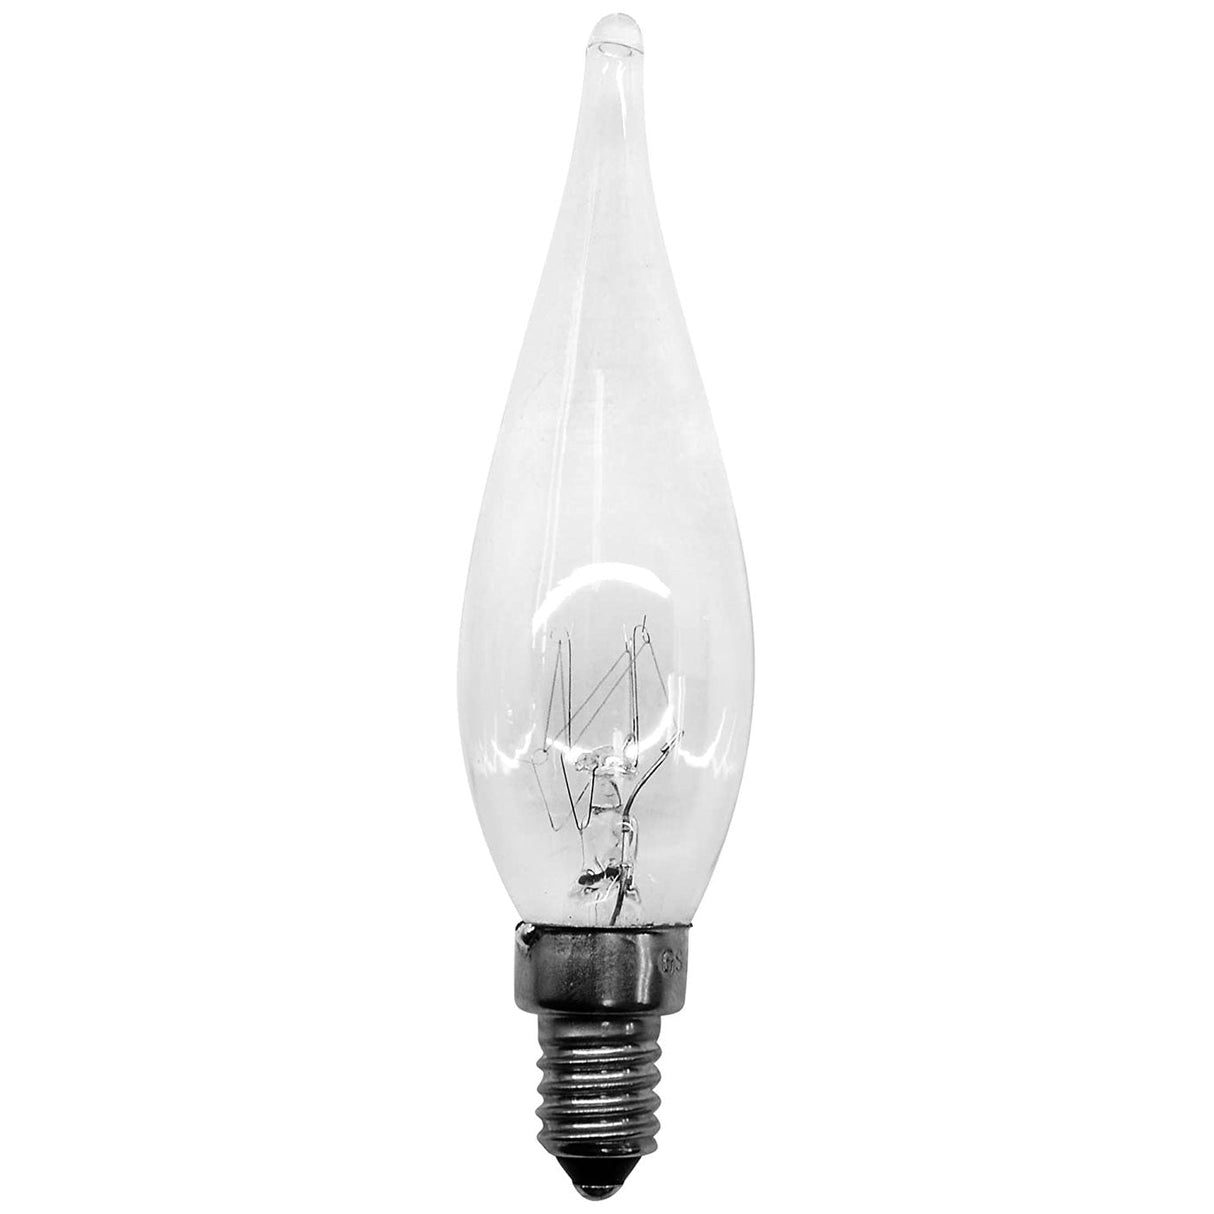 Candle 25w E14/SES 240v  Lighting Clear Pointed GS1 Light Bulb - 22mm